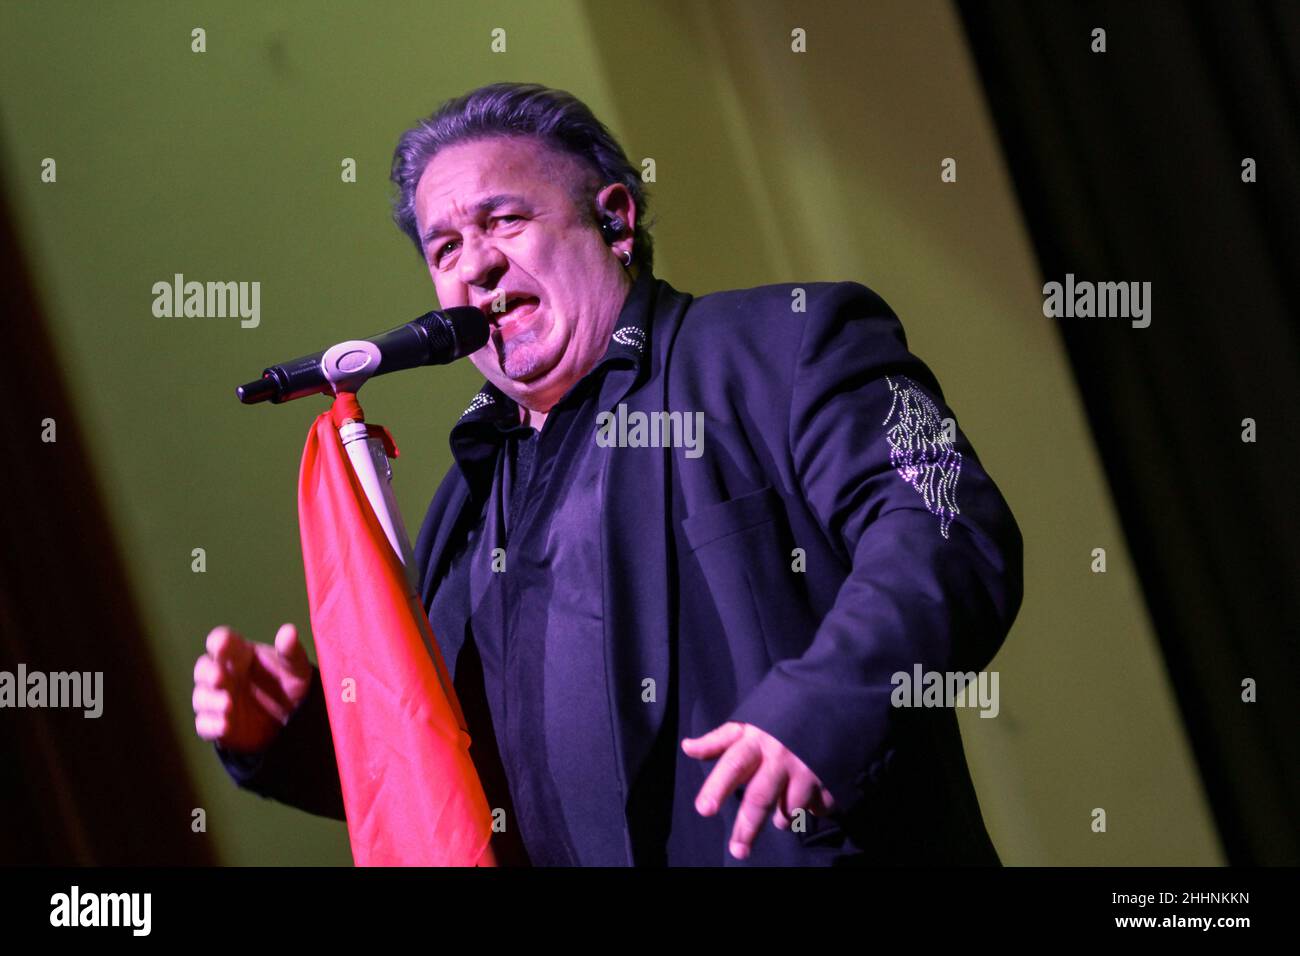 Schmied Loaf, Meat Loaf Tribute Band from Germany with singer Gerhard Schmied acting as Meat Loaf. Concert at Kongresshalle Giessen, Germany, 17th Dec, 2016 --- Fotocredit: Christian Lademann / lademann.media Stock Photo